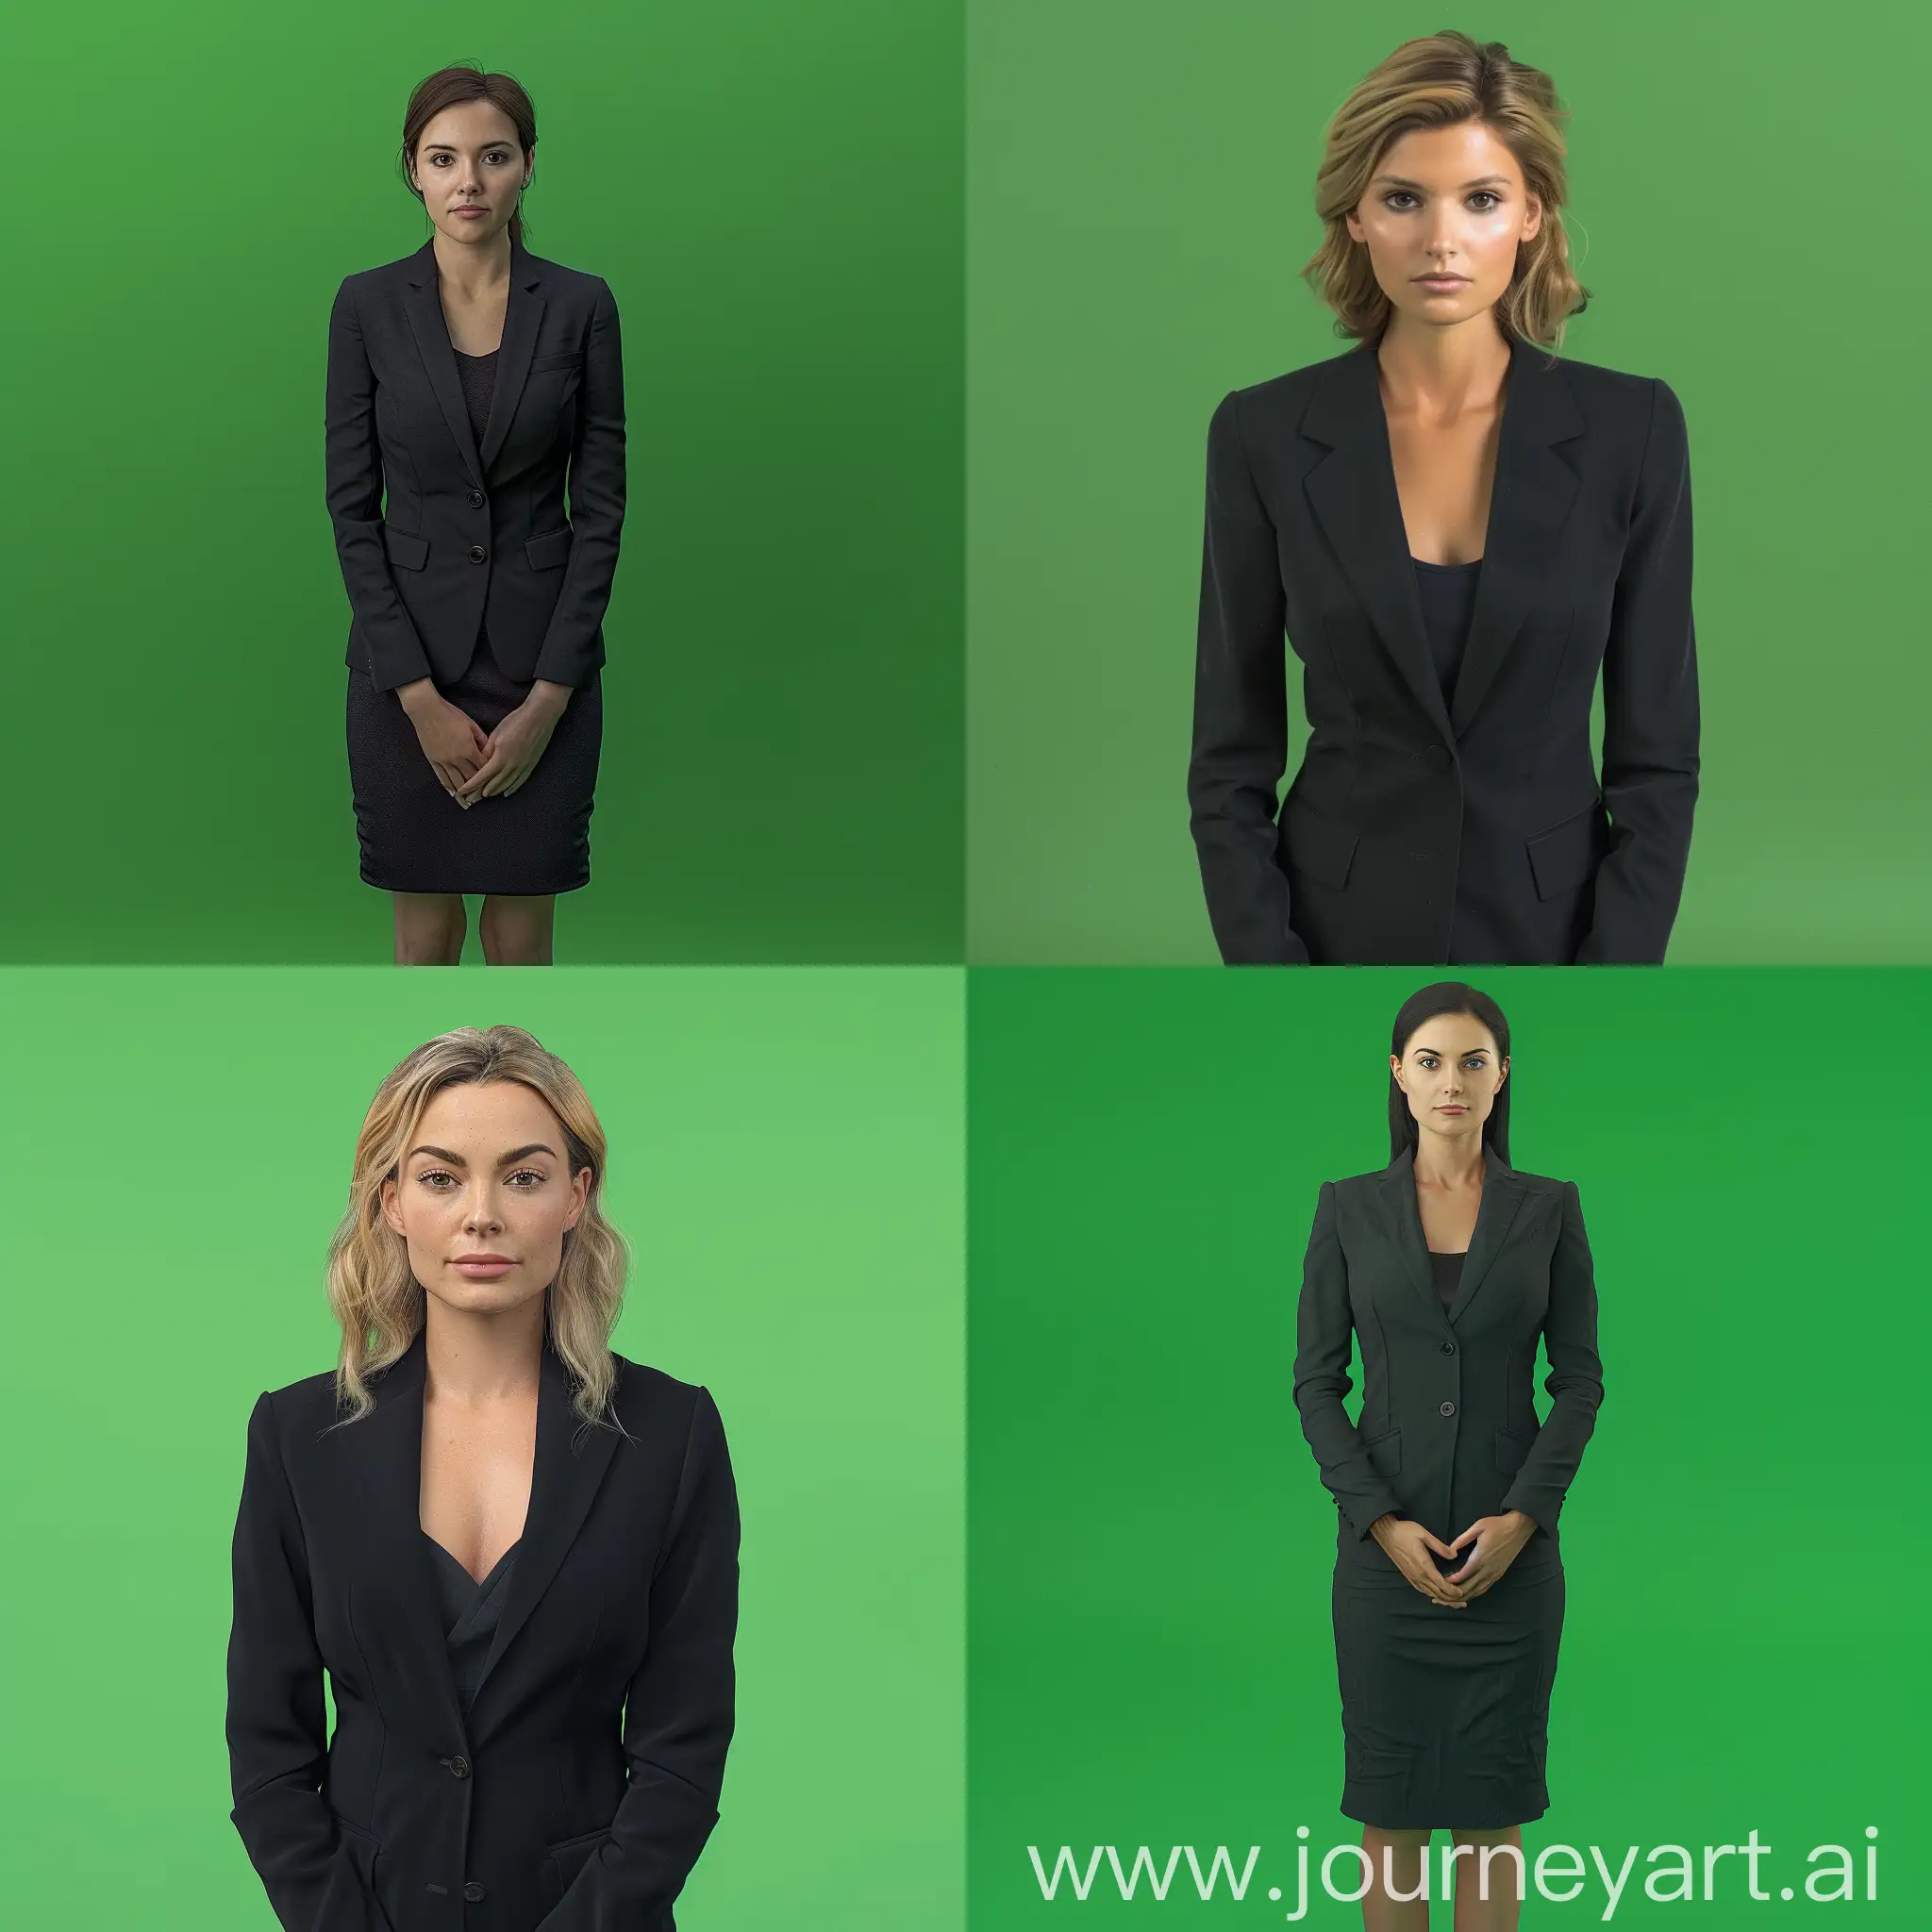 Produce a lifelike portrait of a formal female news presenter based on a real individual. 
The image should depict a presenter standing upright, still no movement, showing their full body, with a natural expression. 
Utilize a high-quality, front-facing photograph with well-defined lighting (dont use any shadows as the light is from the front). 
The background must be a solid chroma green color.
Ensure that the edges of the model are smooth to facilitate future background removal, for instance by avoiding complex hairstyles, and smooth cloth borders.